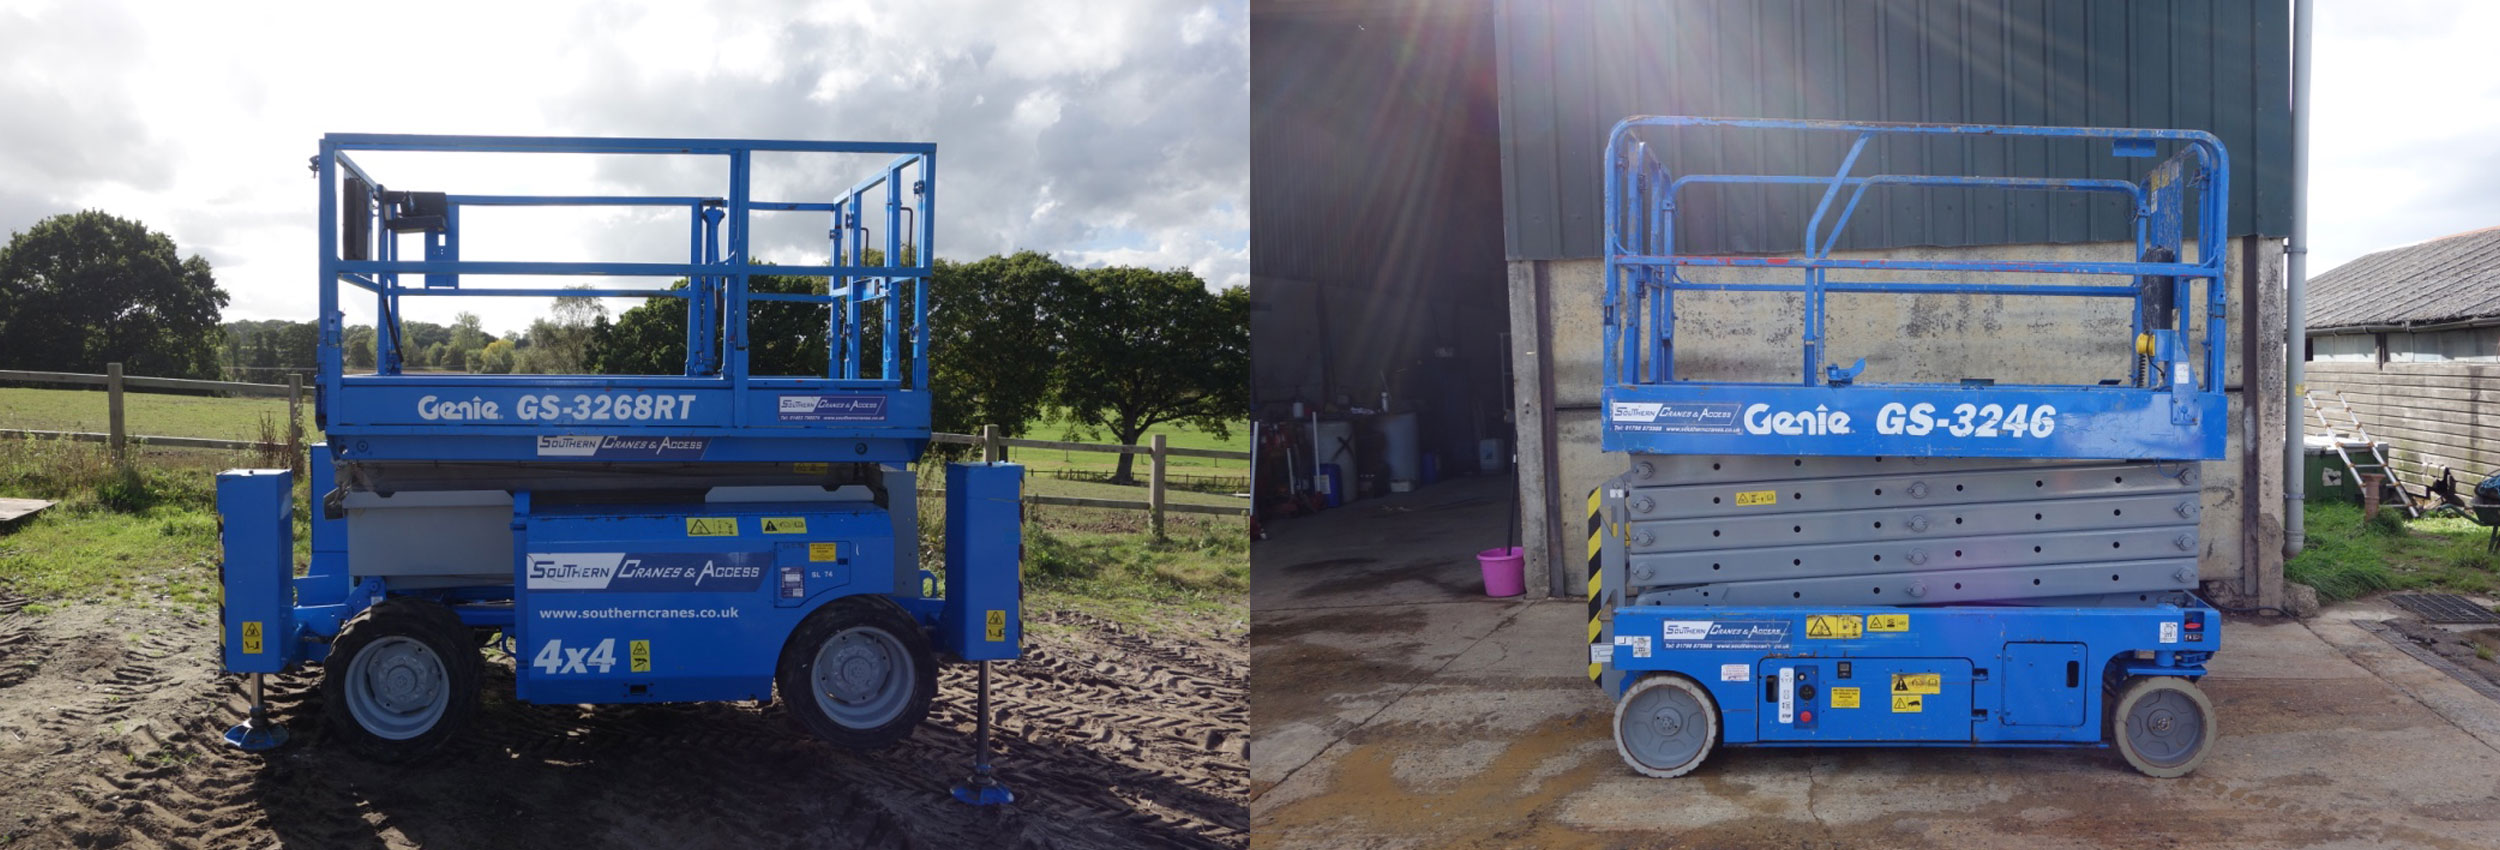 Powered access scissor lifts for hire at Southern Cranes & Access, Sussex